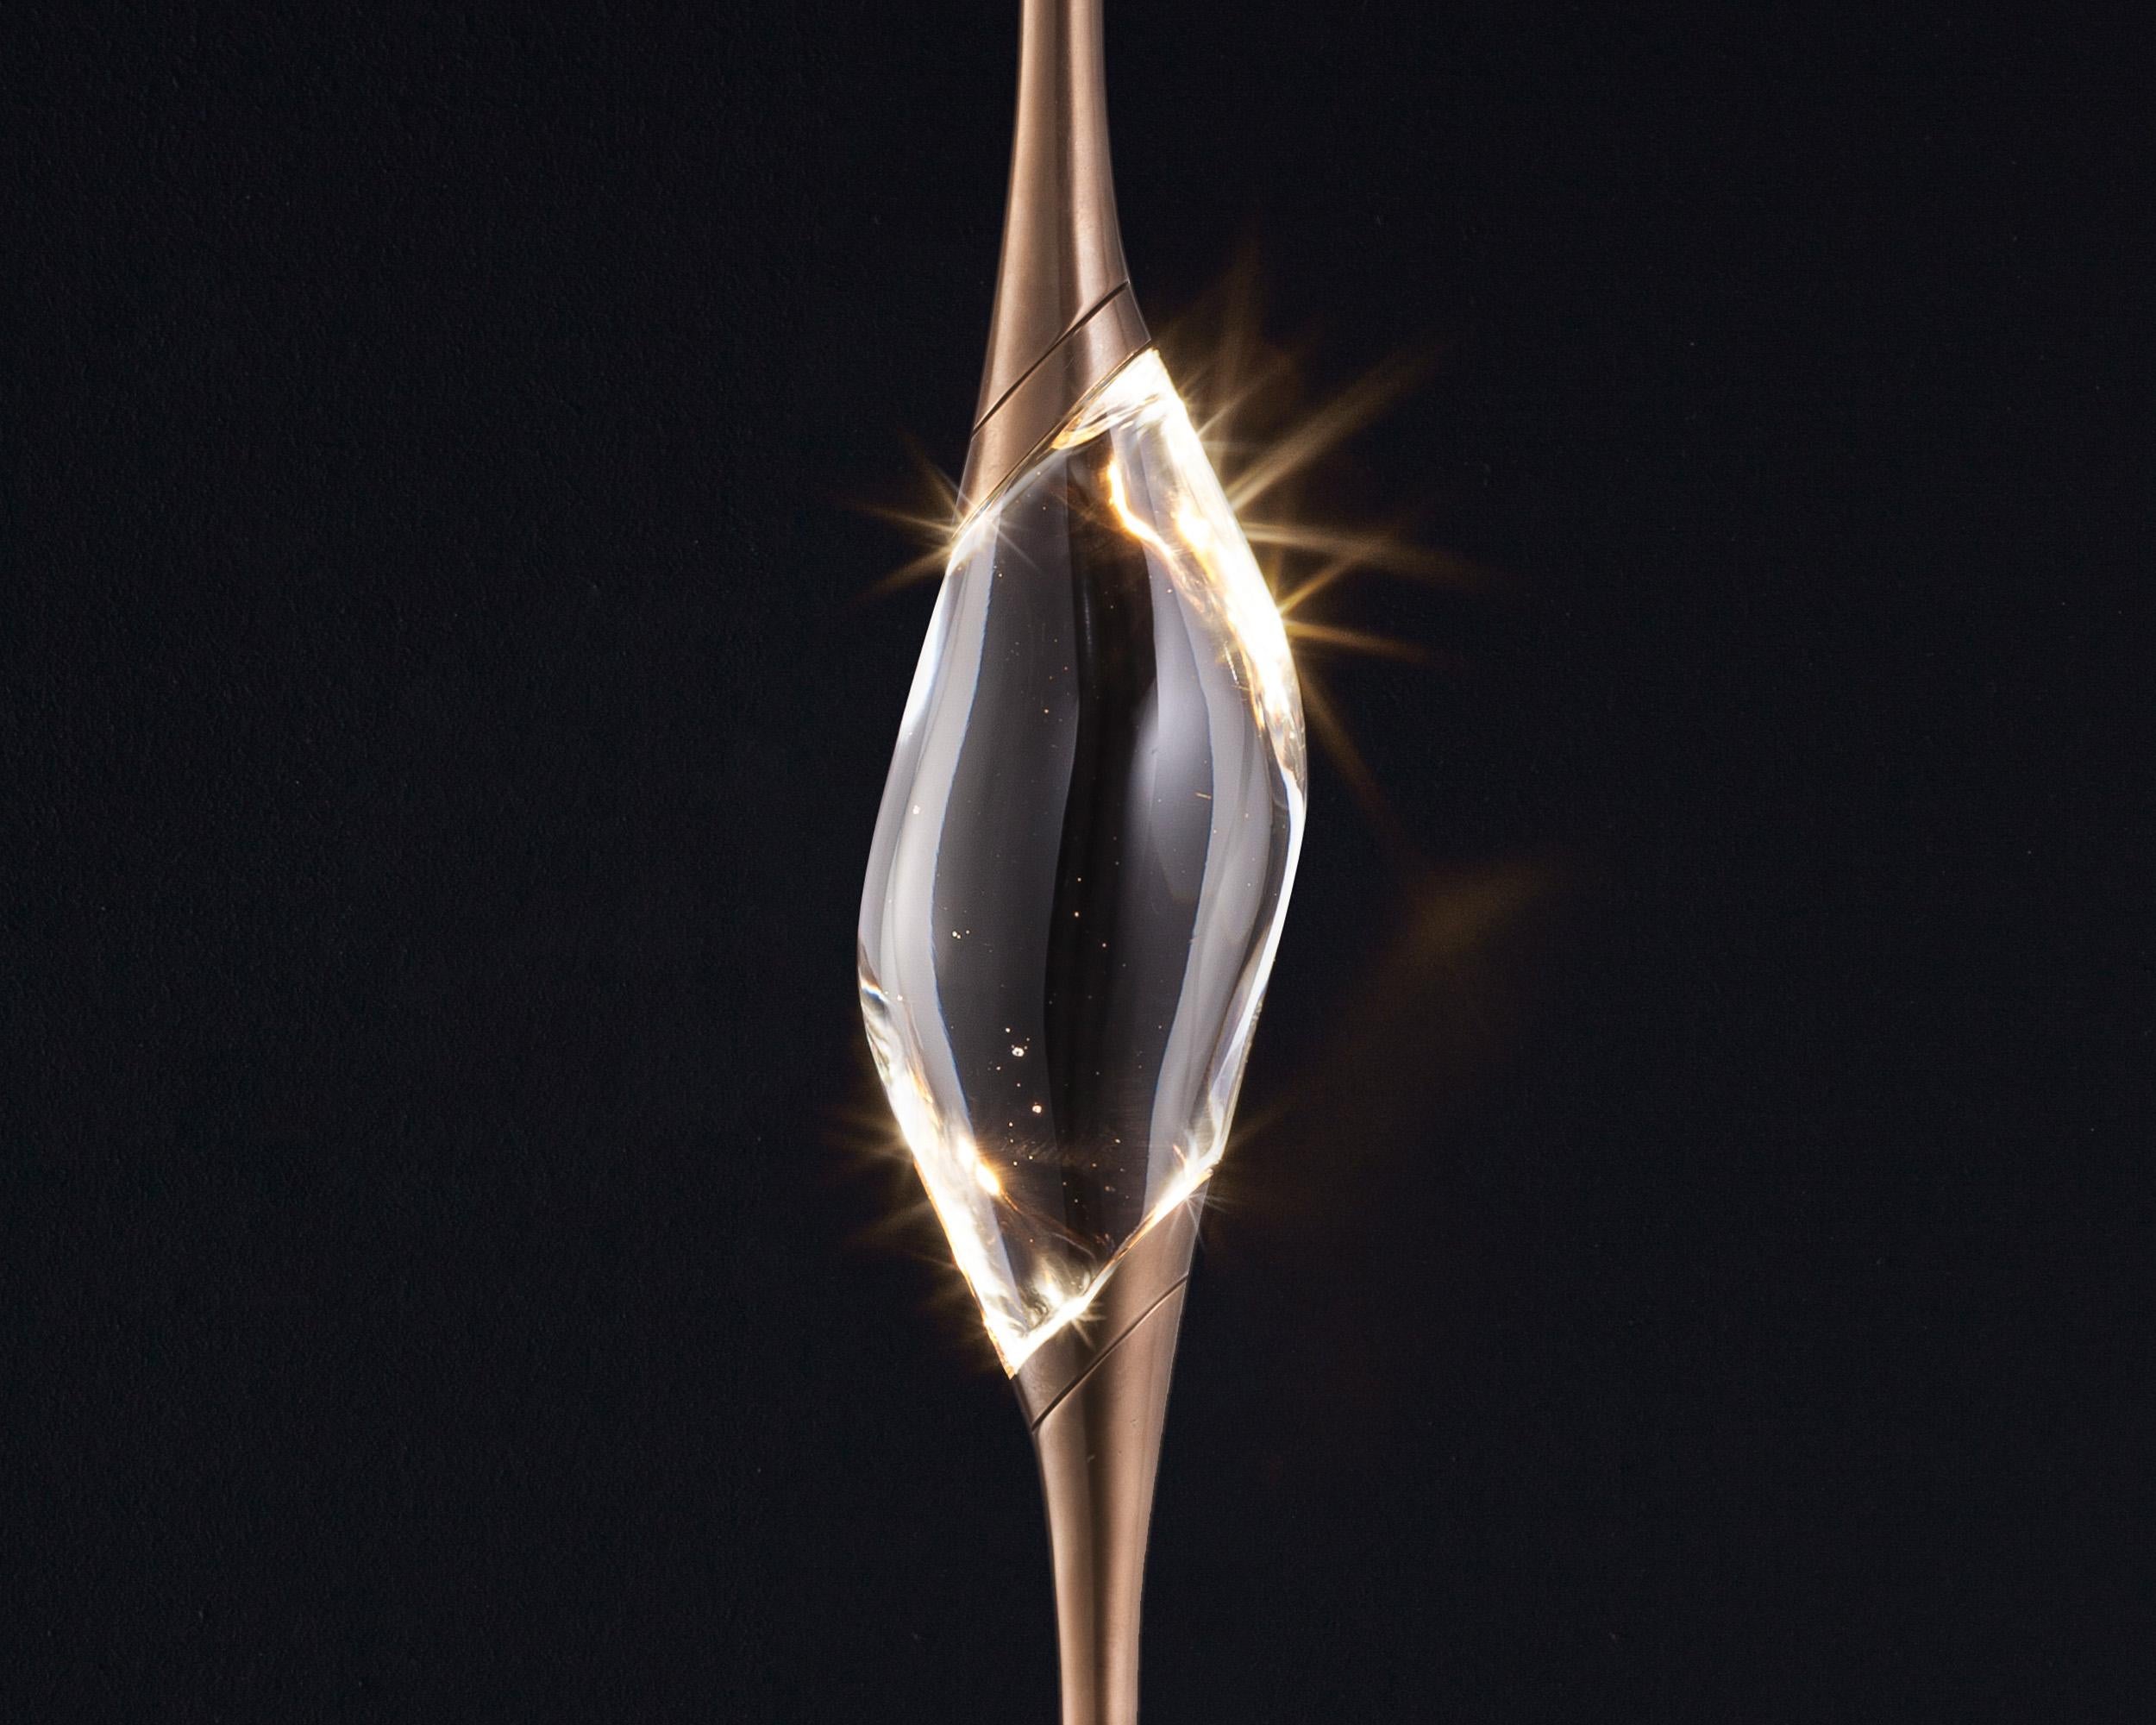 Il Pezzo 12 is a female figure suspended in the air, carrying in her womb the light. It’s nimble, refined, addictive.
The solid clearest crystal, brilliantly illuminated by two LEDs, diffuses ambient light and casts mesmerizing patterns throughout